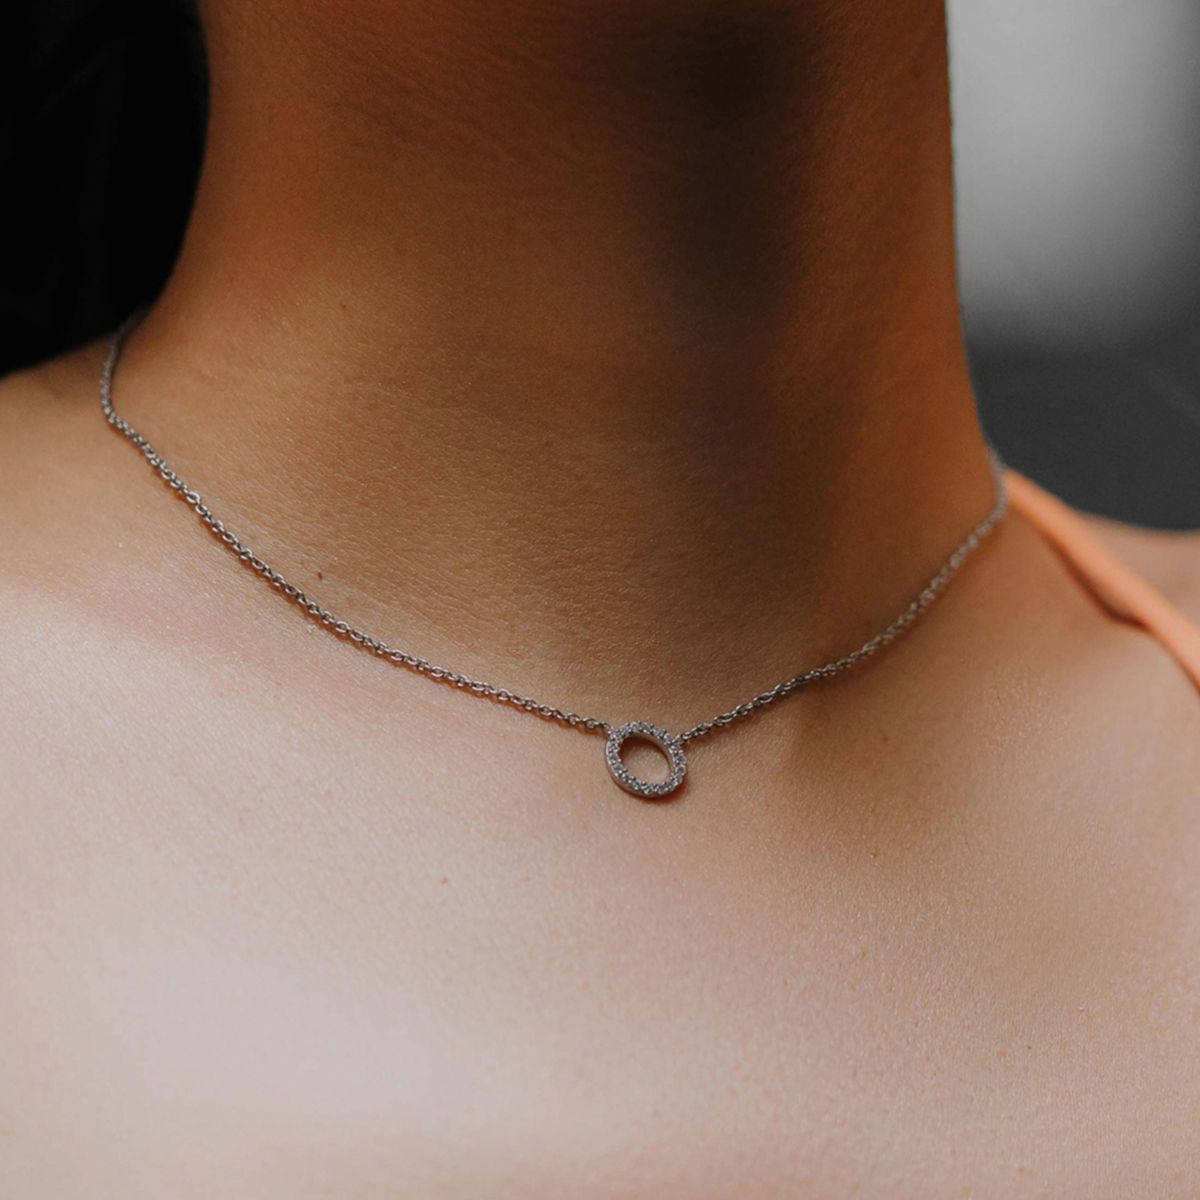 Shaya by CaratLane Cool For The Summer Pendant Necklace in 925 Silver: Buy  Shaya by CaratLane Cool For The Summer Pendant Necklace in 925 Silver  Online at Best Price in India